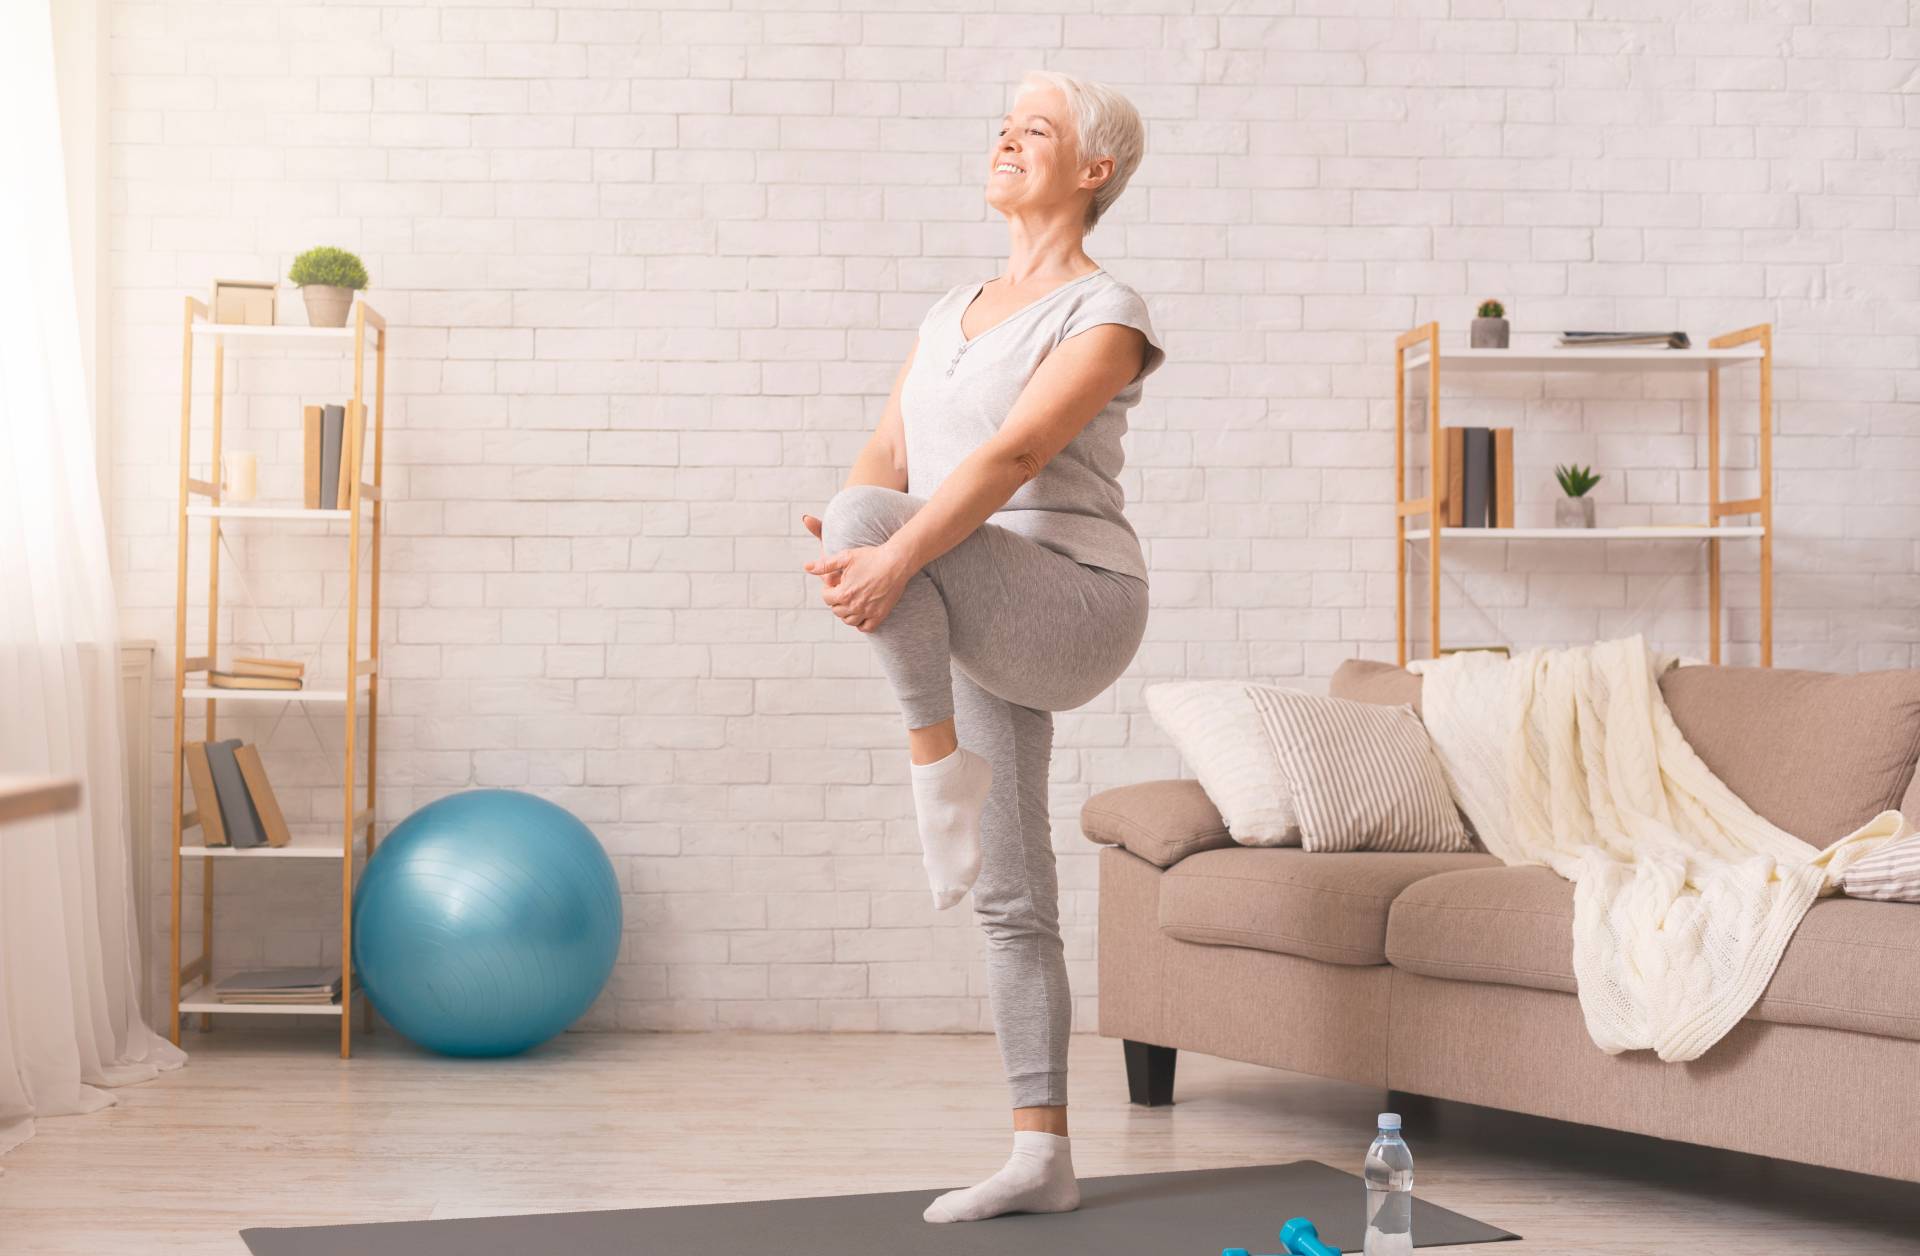 Old woman doing a single-leg stance in her living room.